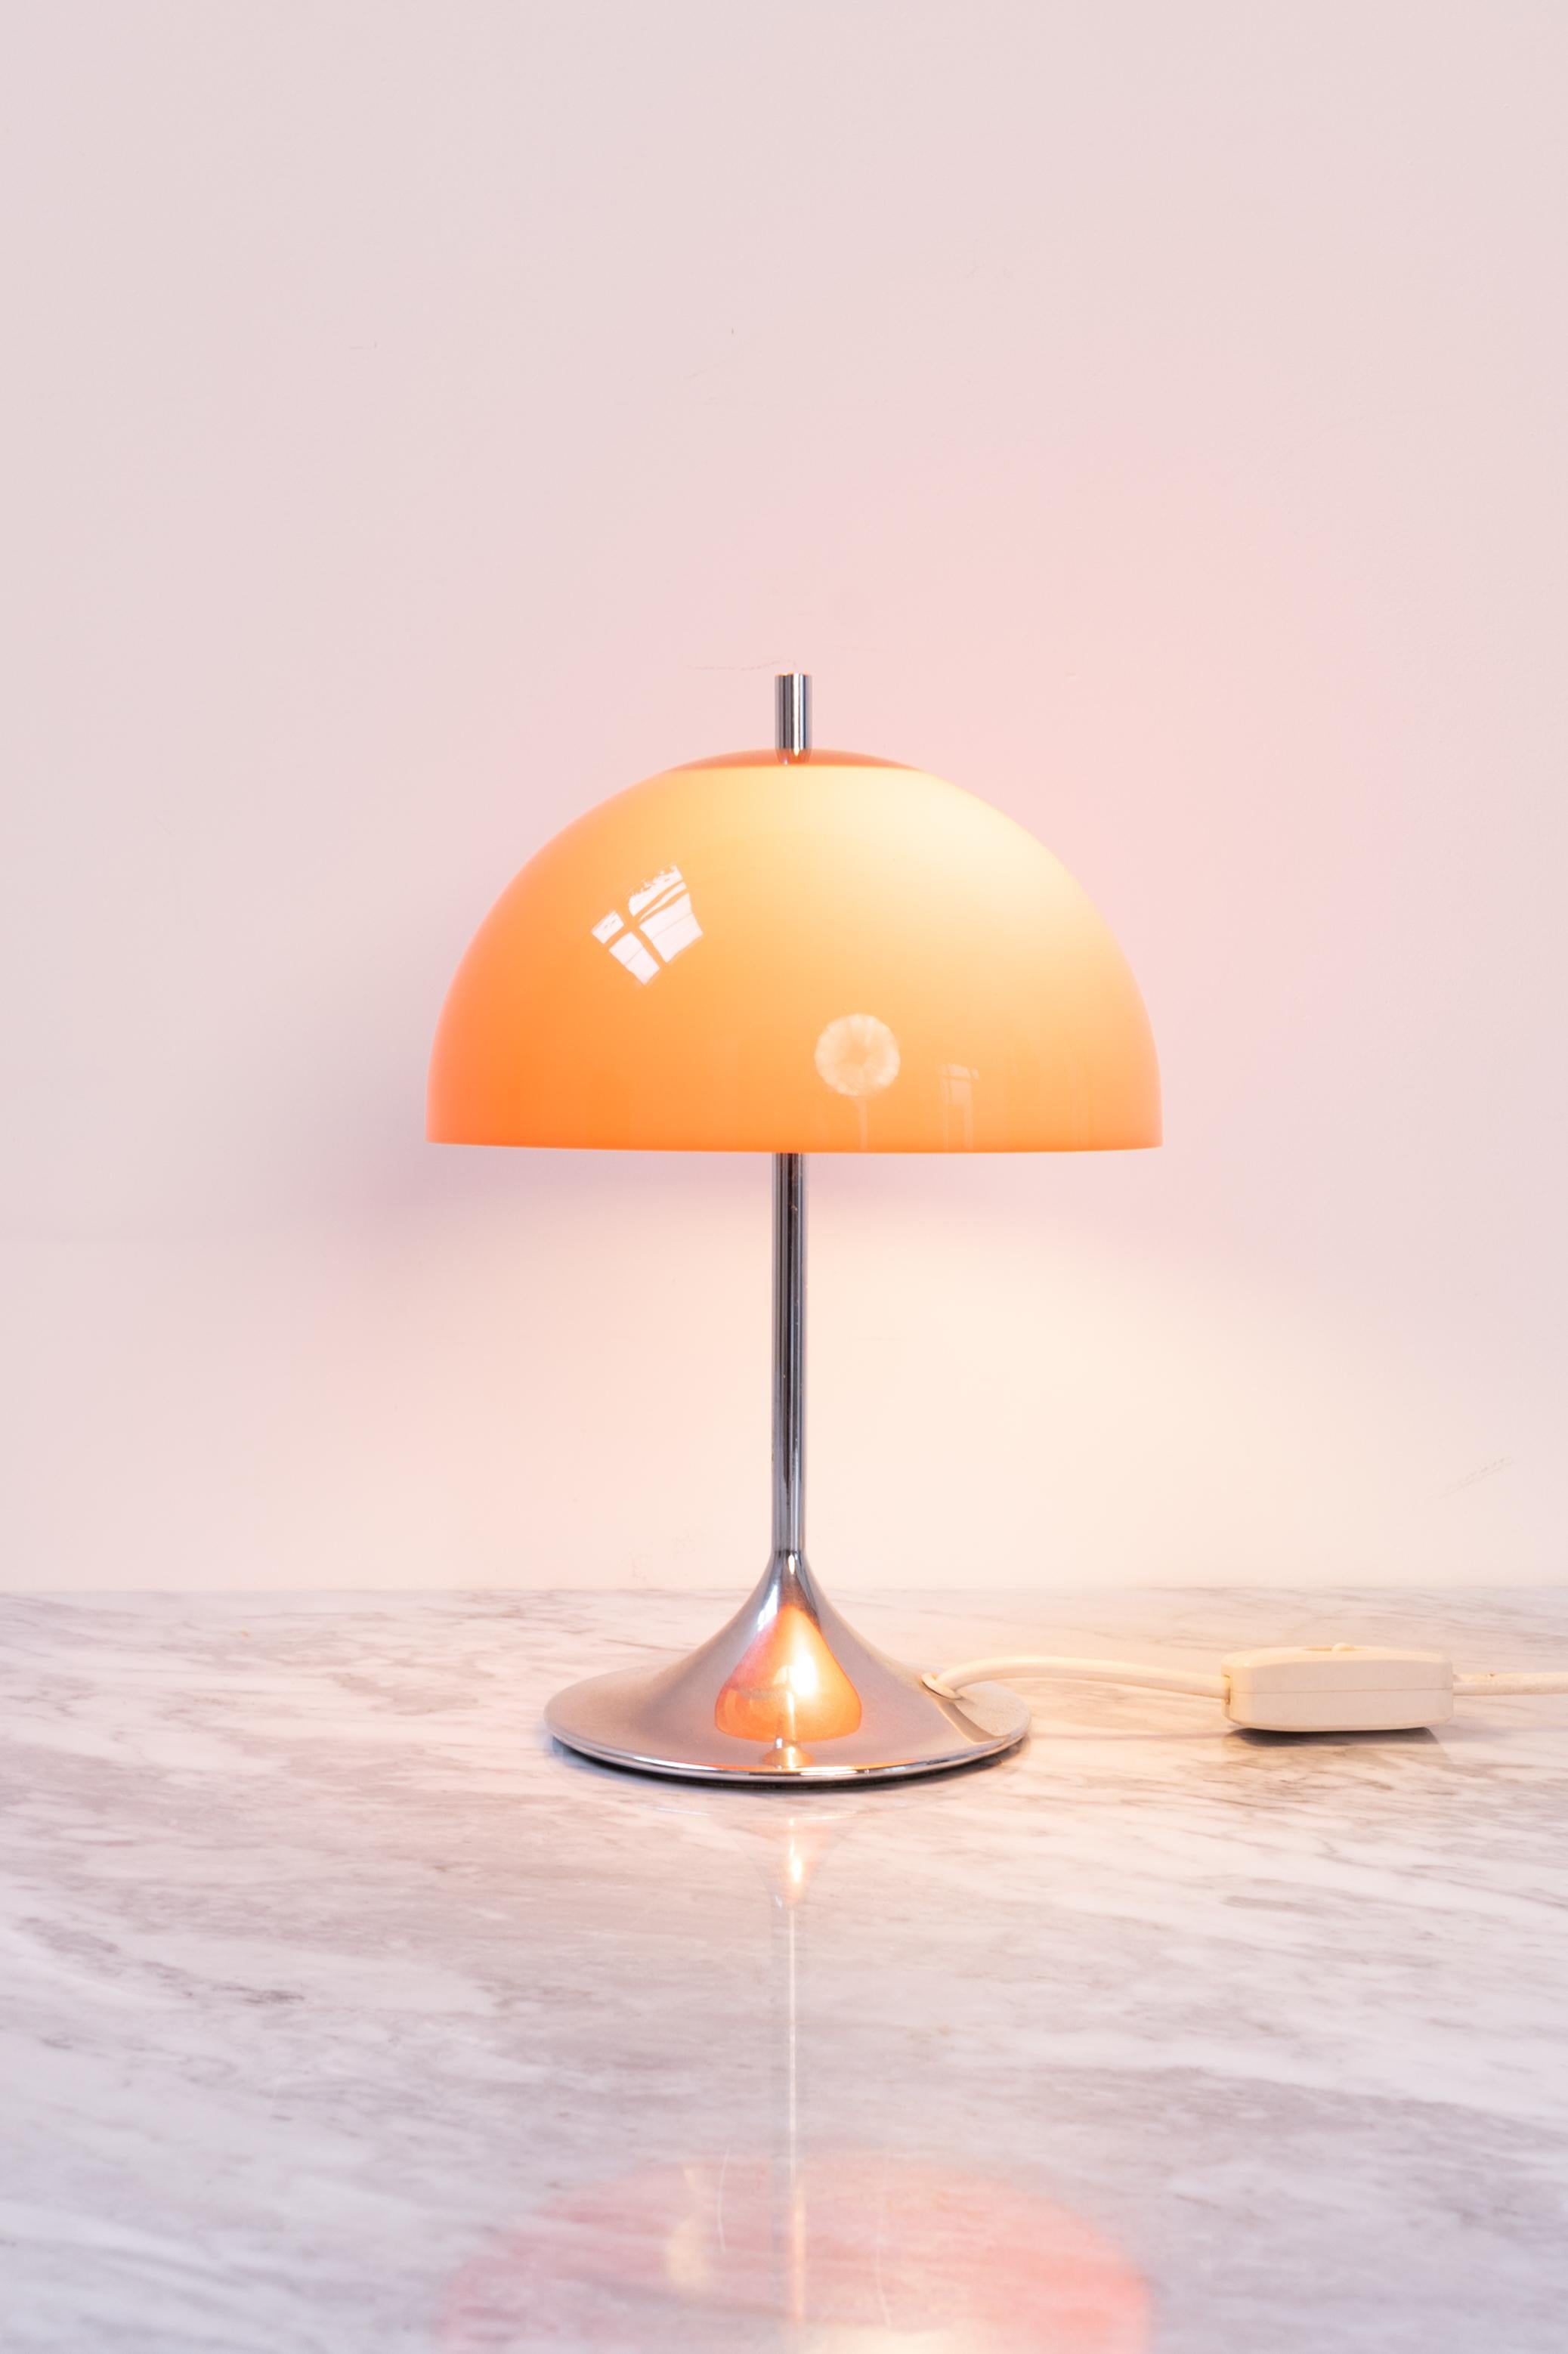 German space age vintage orange table lamp by Frank Bentler for Wila (1970s)

Vintage orange plastic lamp, with chrome tulip foot. 

Designed by Frank Bentler for Wila, Germany 1970s.

Light source: E14 / E12 - max 40W. Switch attached to the